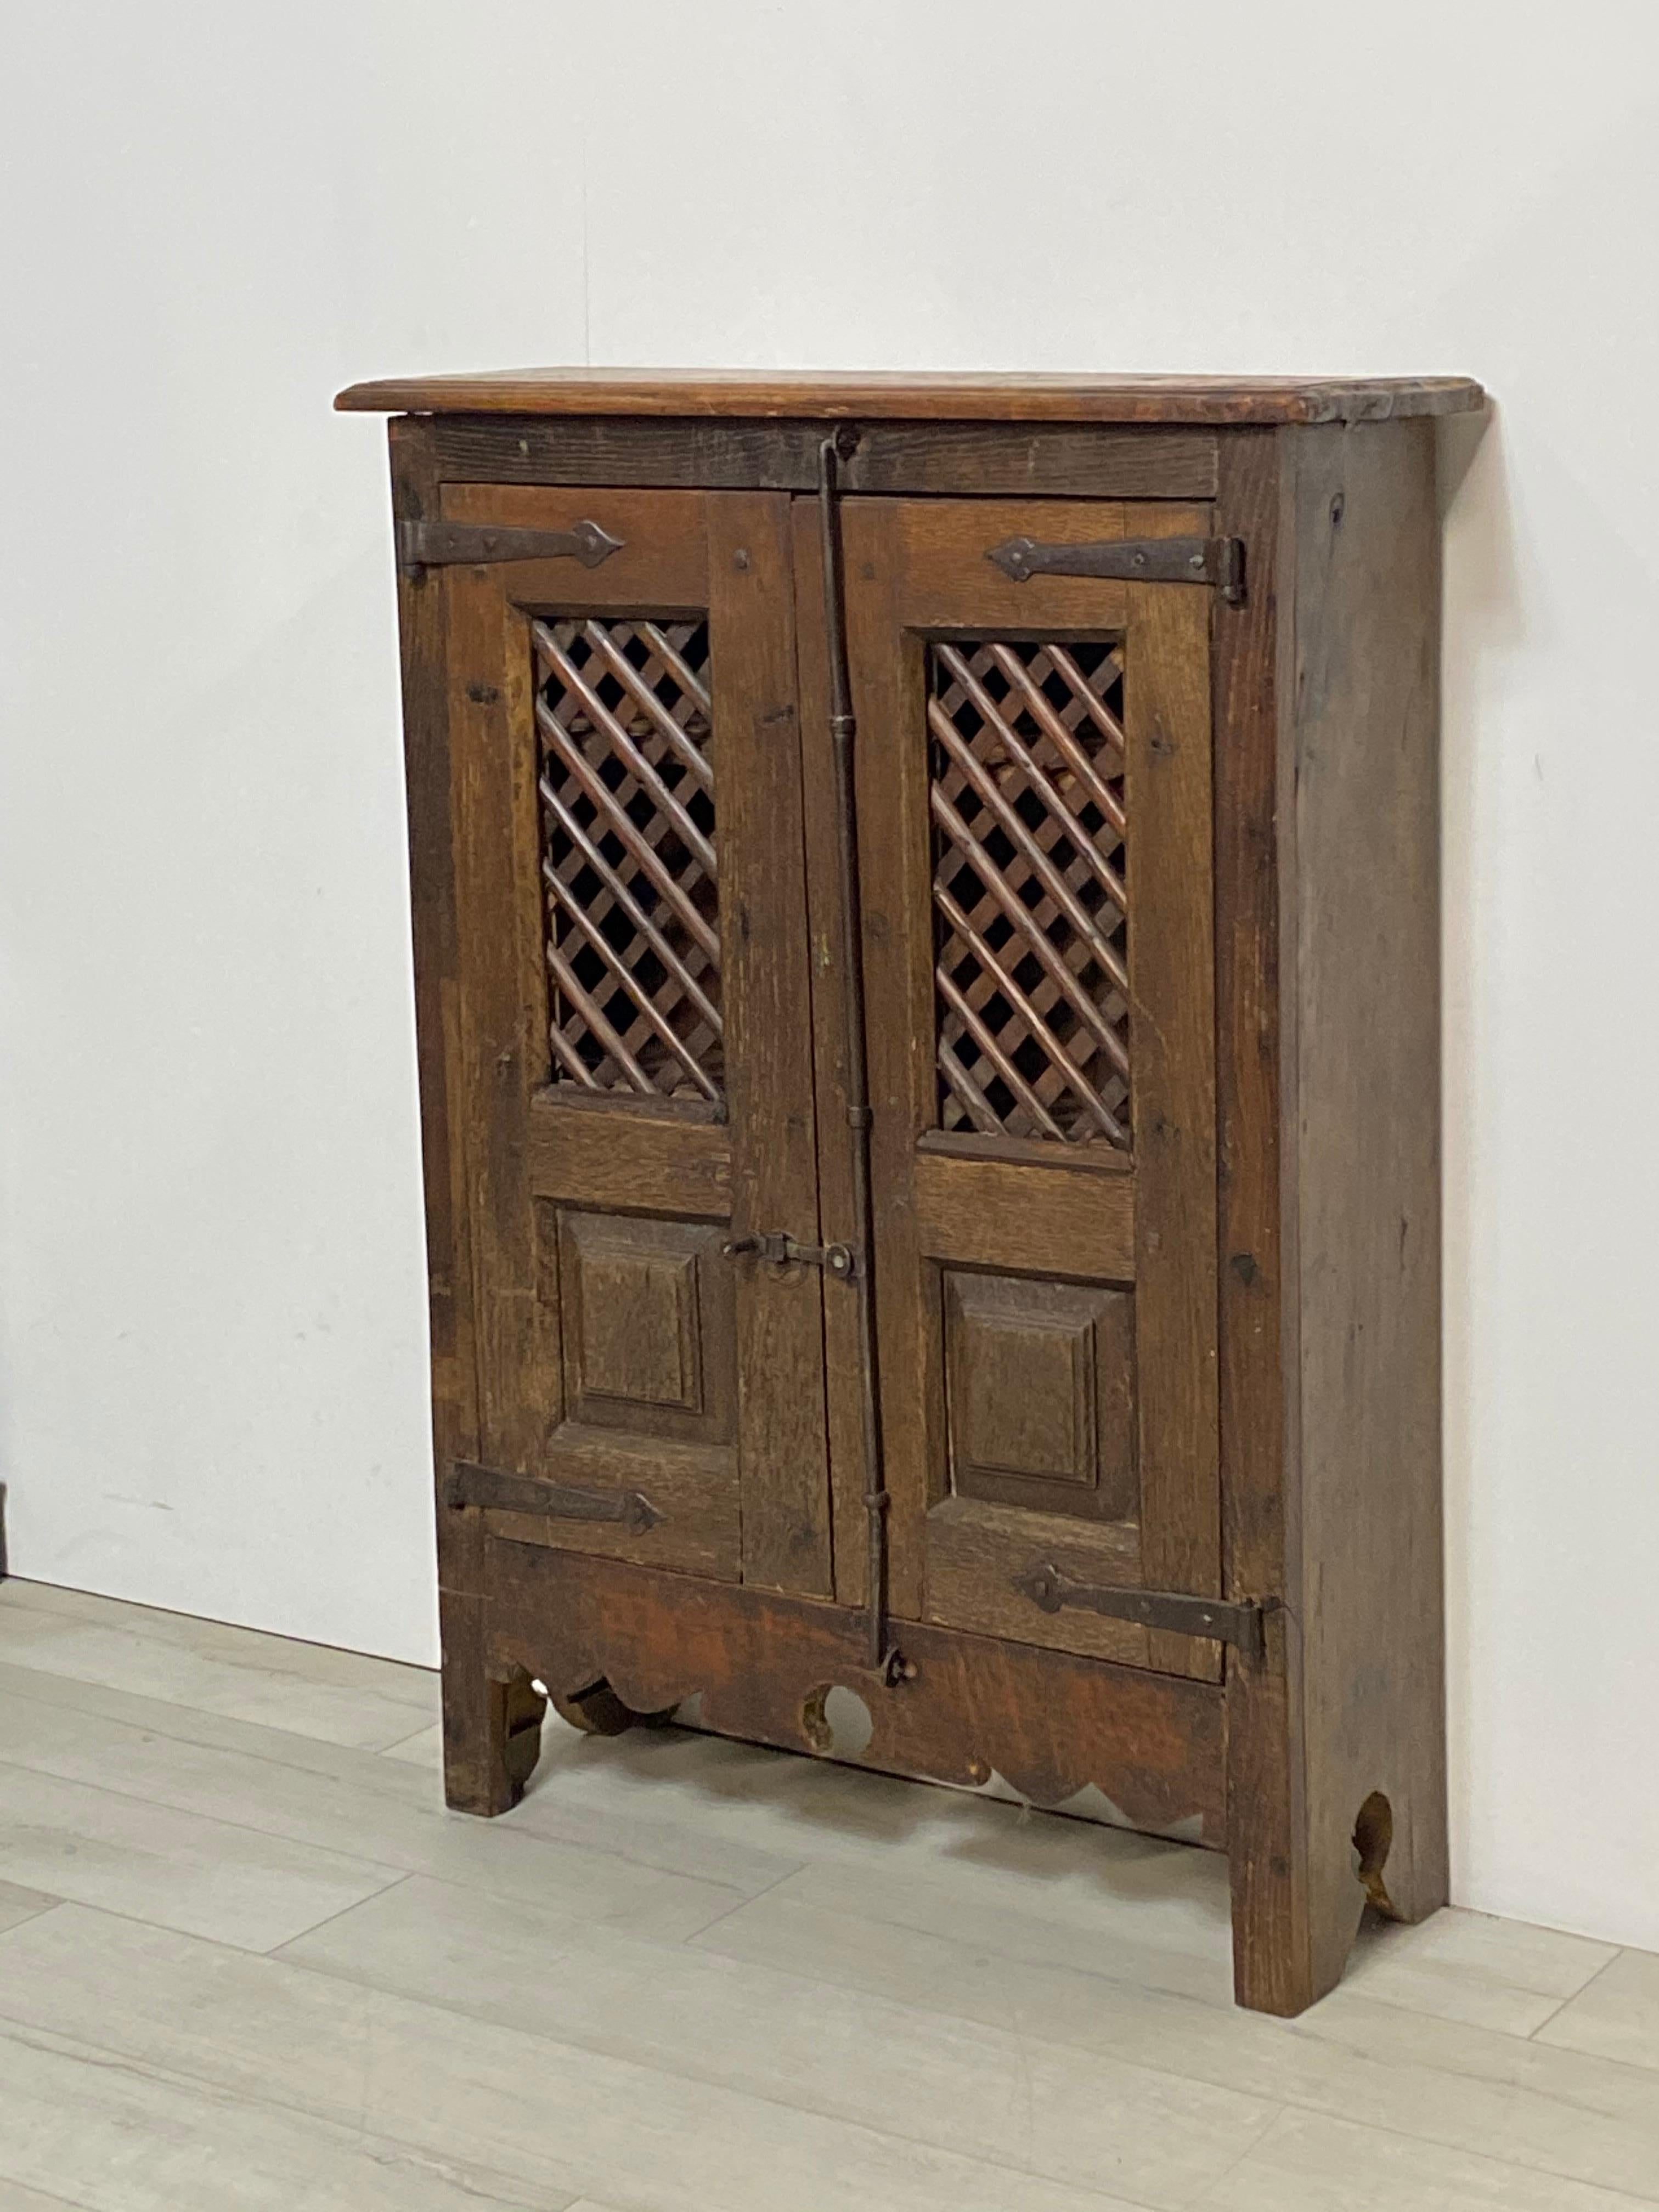 Highly unusual, small-scale Latin American (possibly Mexican), late 18th/early 19th century Mesquite wood two-door cabinet. This is approximately 1/4 size of the usual cabinets of this type. It was likely used for food storage. It has all original,